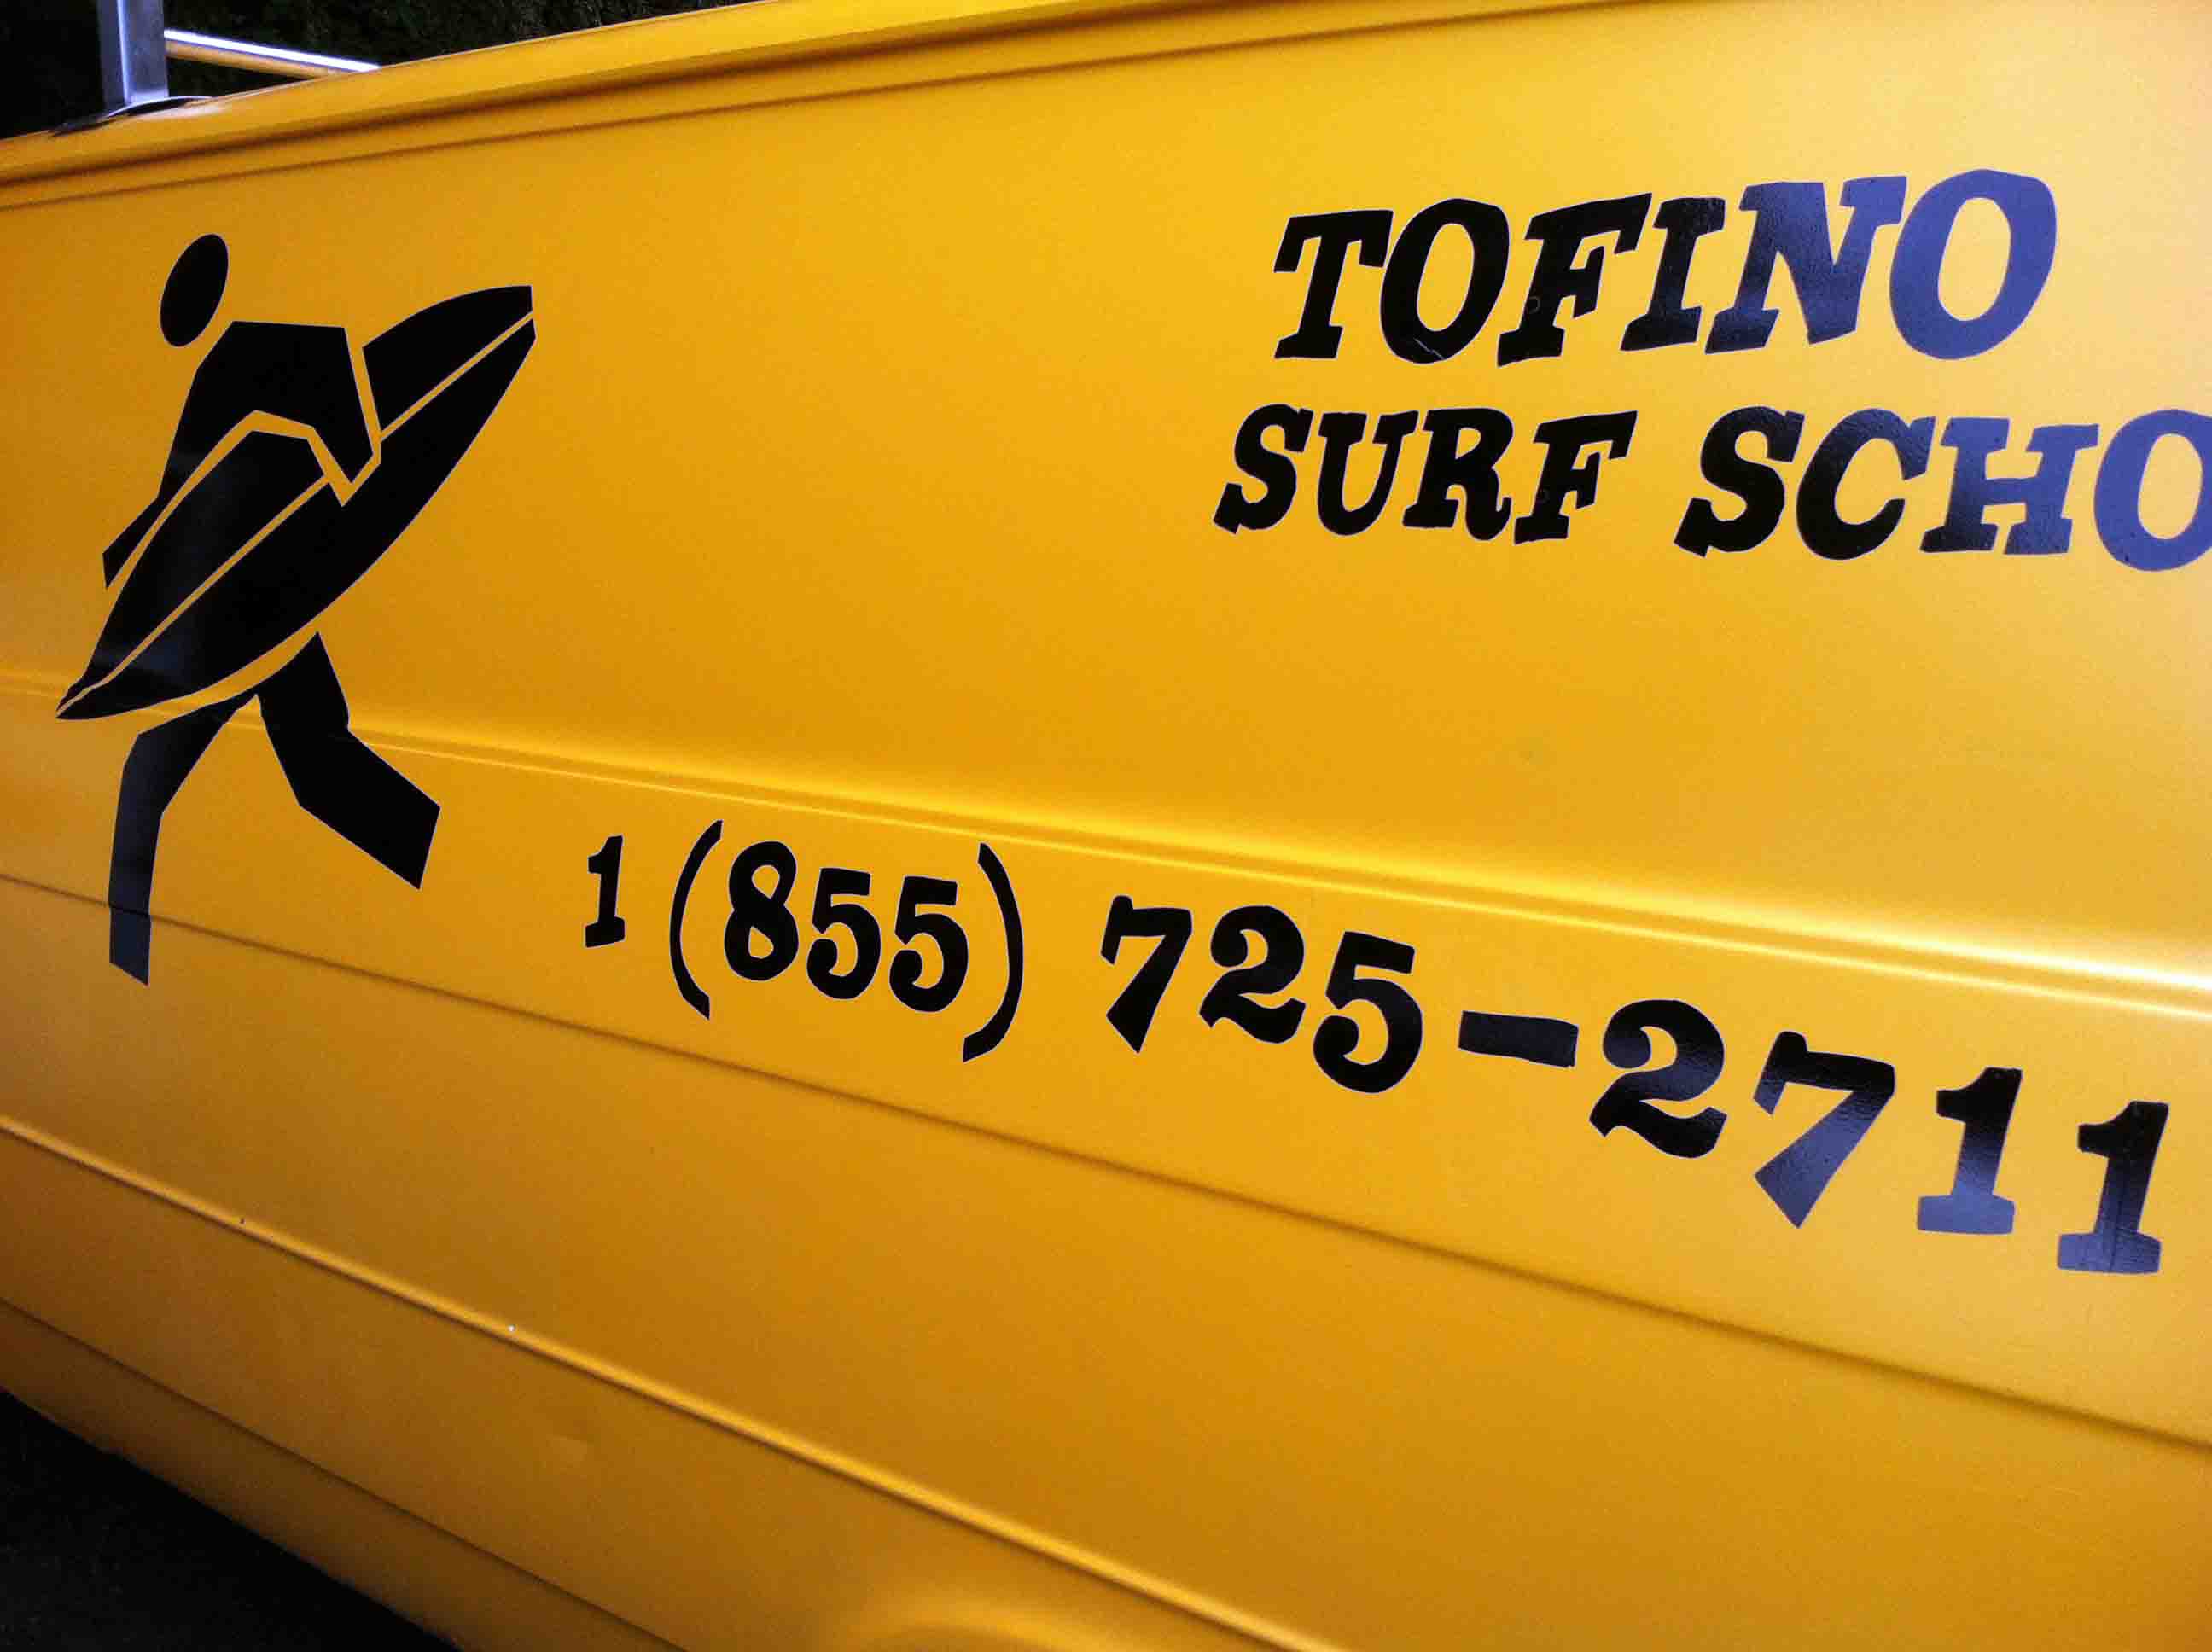 Epic Tofino Surfing Footage, NOT.